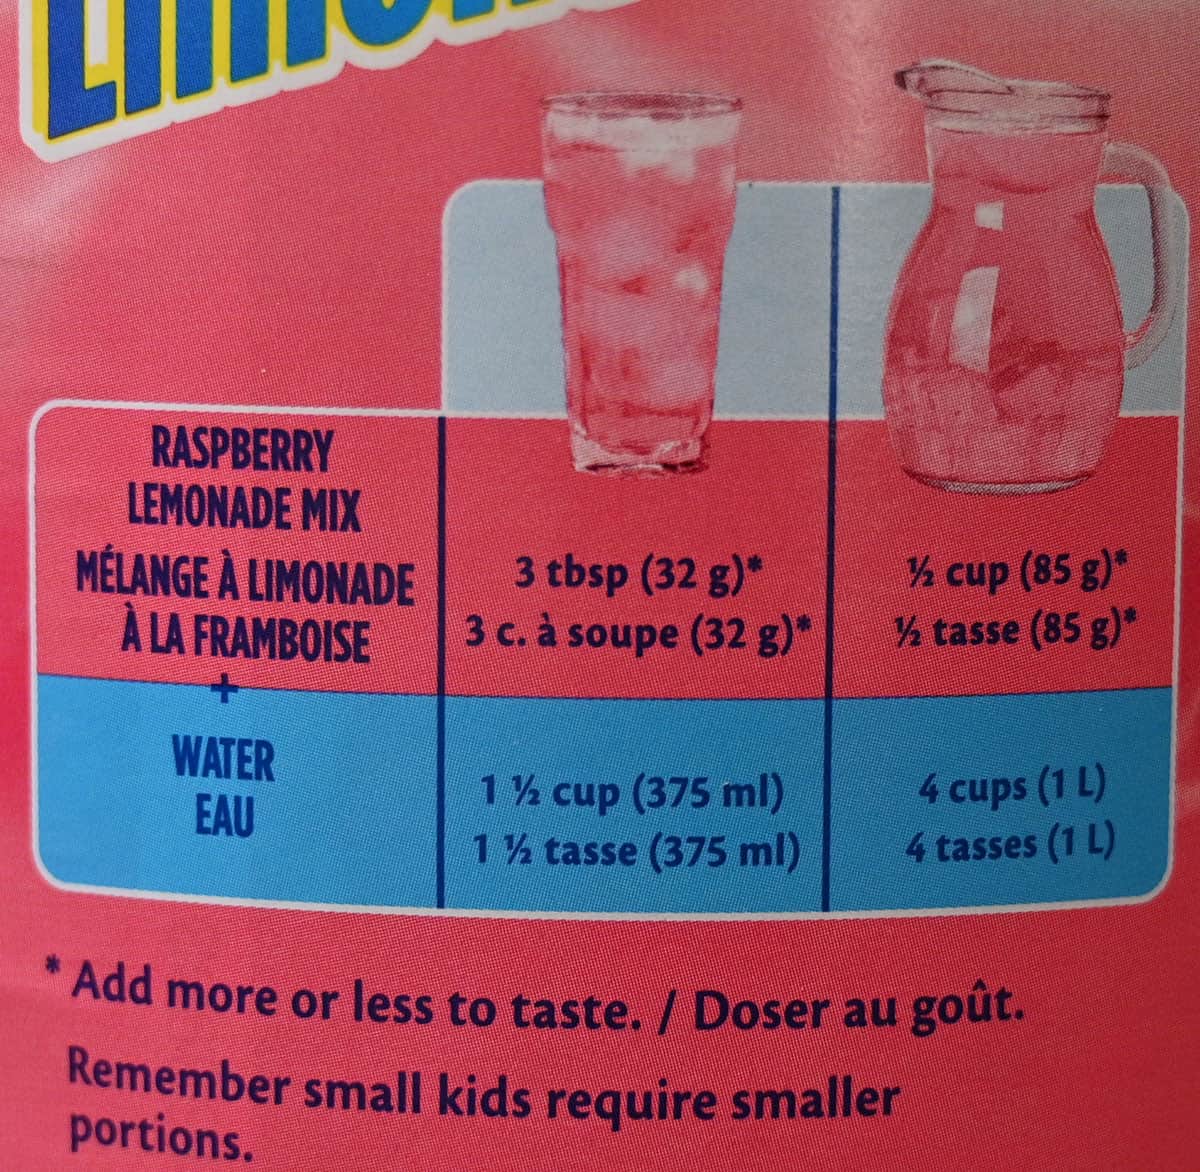 Costco Good Host Raspberry Lemonade preparation instructions from container. 